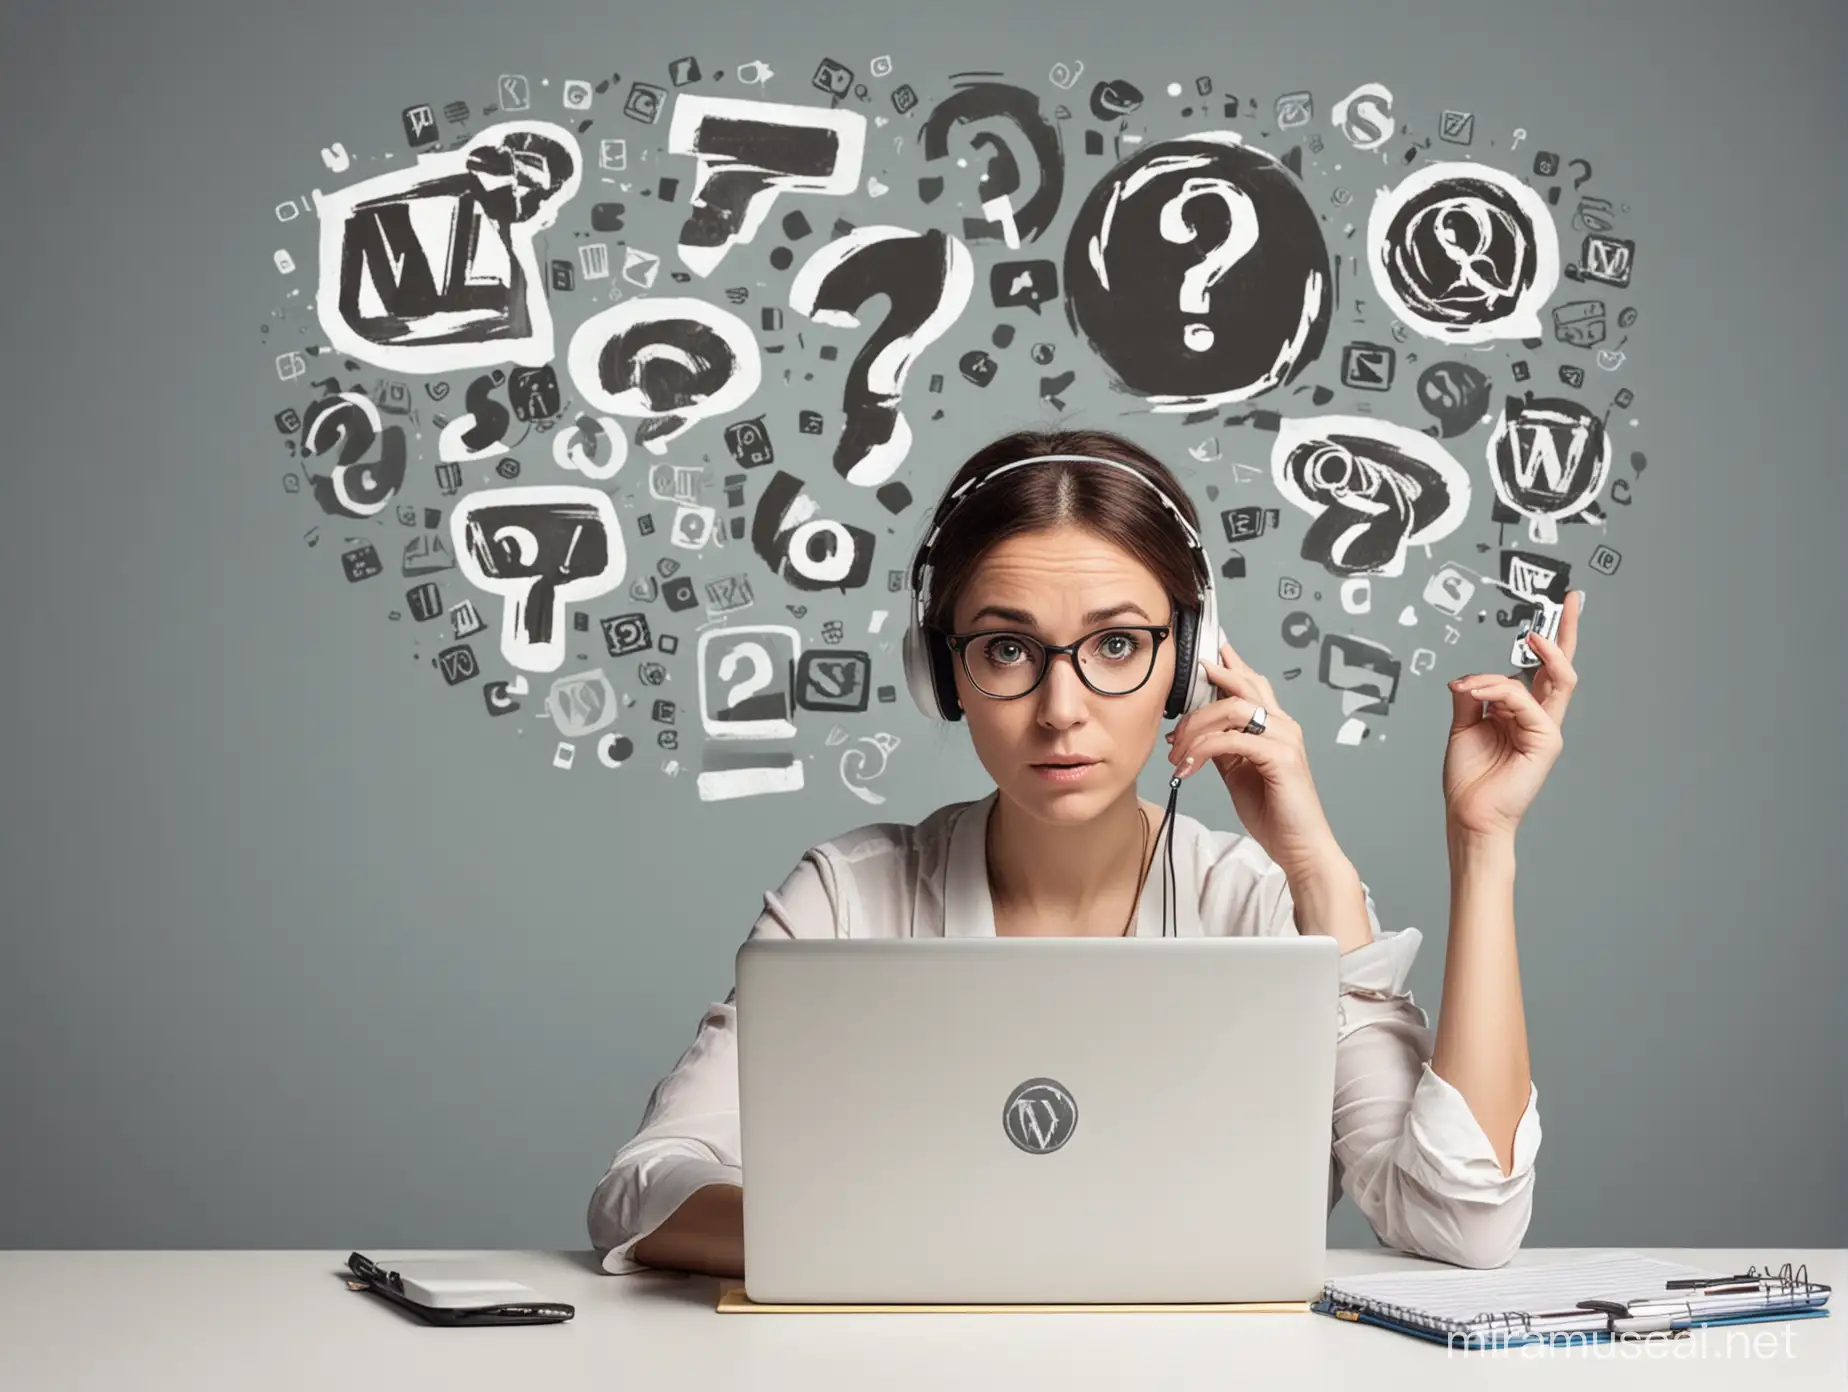 A woman is thinking with a question mark on her head and a WordPress logo that looks like a question mark, and a large computer next to her, a mobile phone, a tablet, a notepad and a pen with several WordPress logos and a banner with a WordPress logo on the wall.